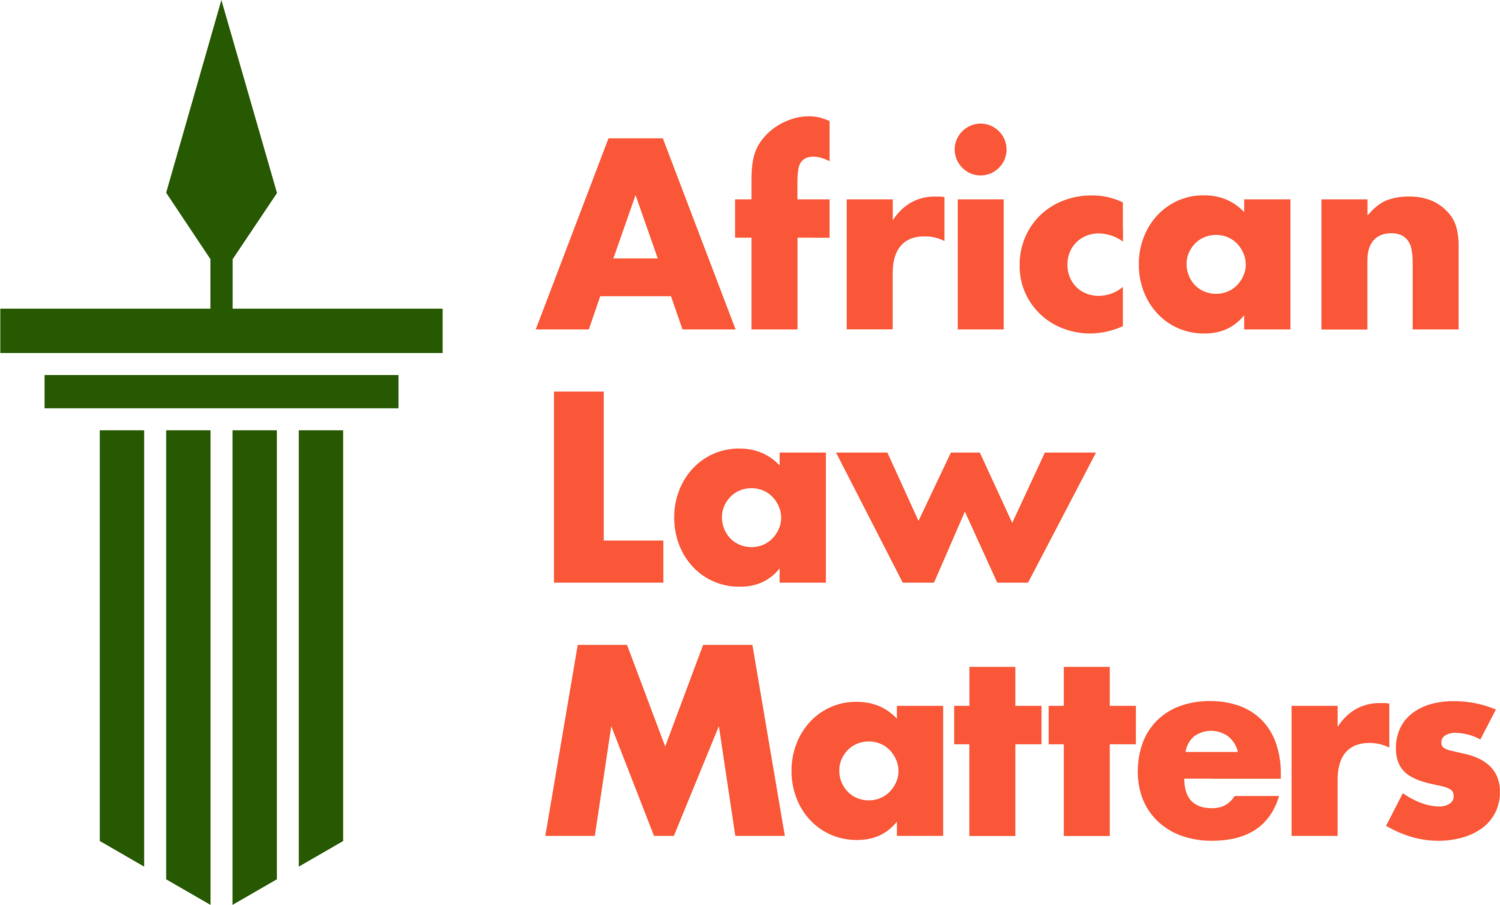 African Law Matters